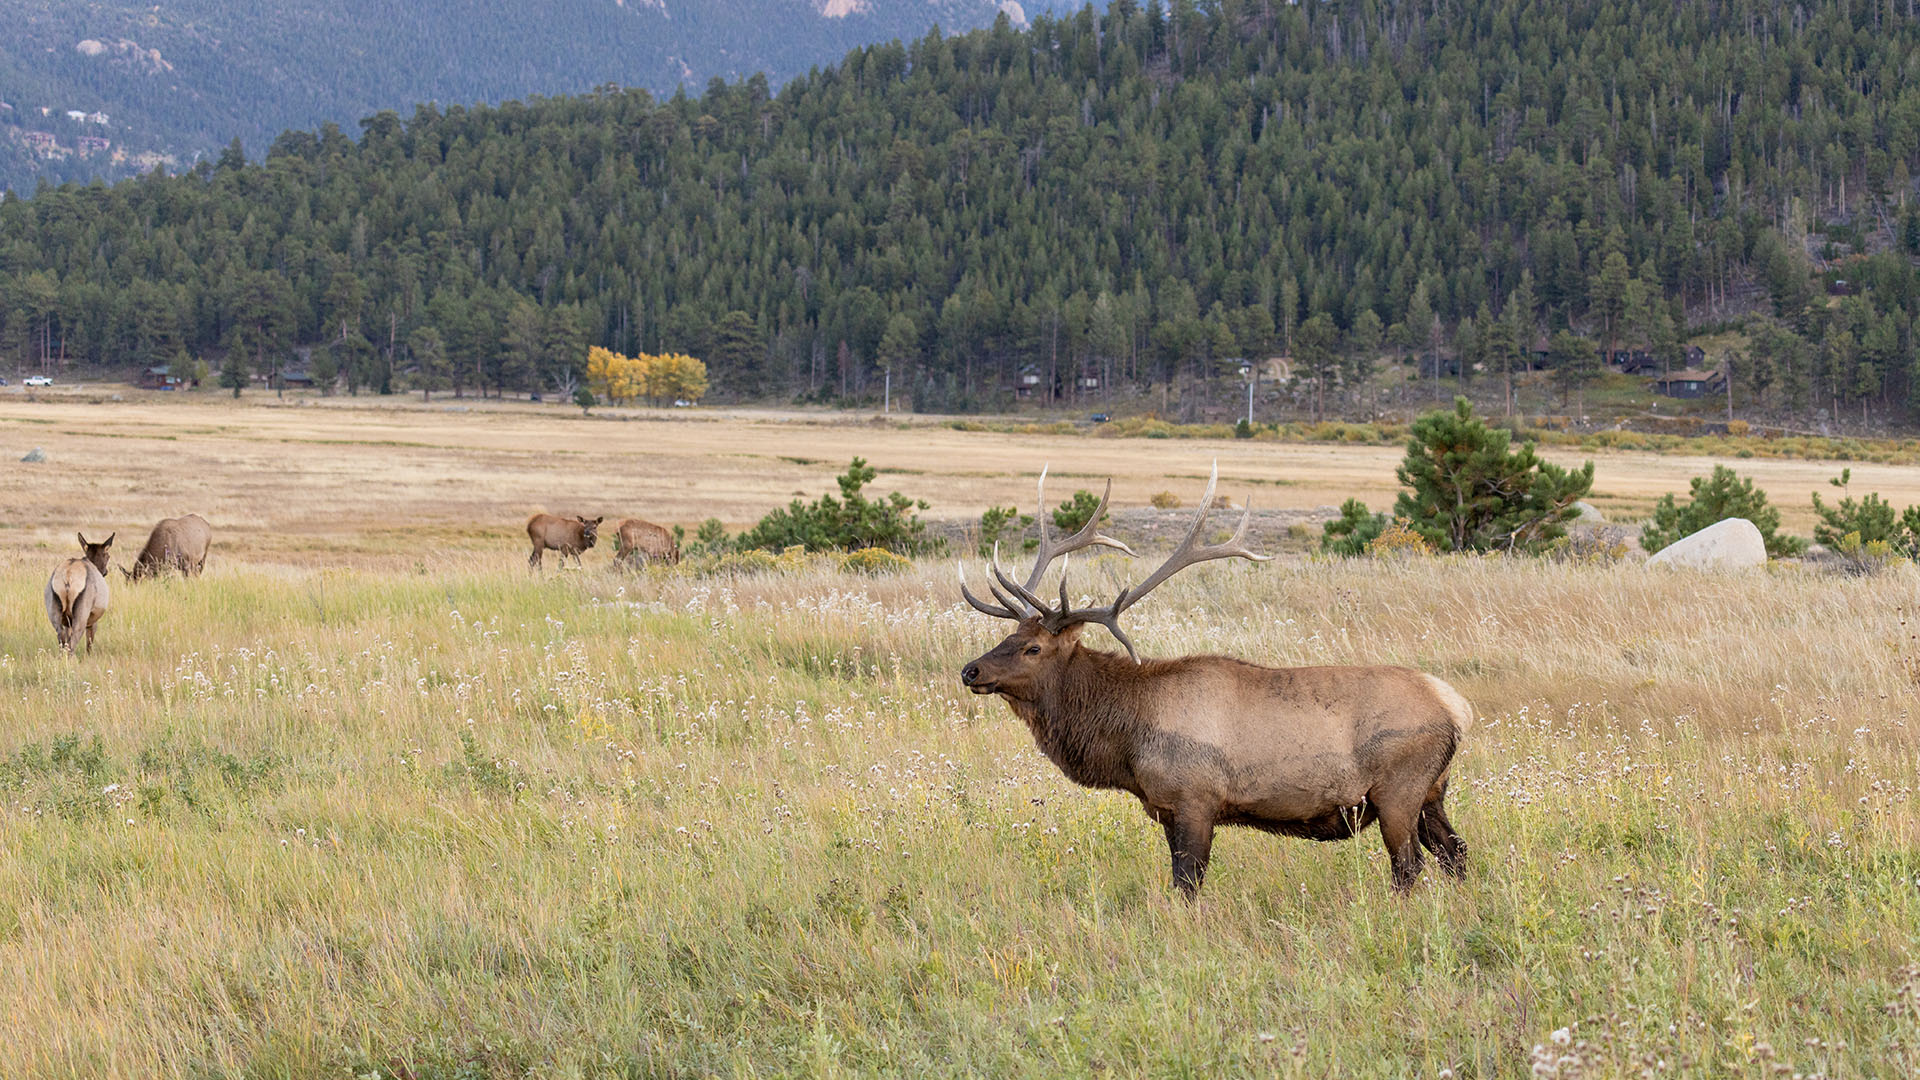 PHOTOS: During peak mating season, students get the chance to observe elk behavior